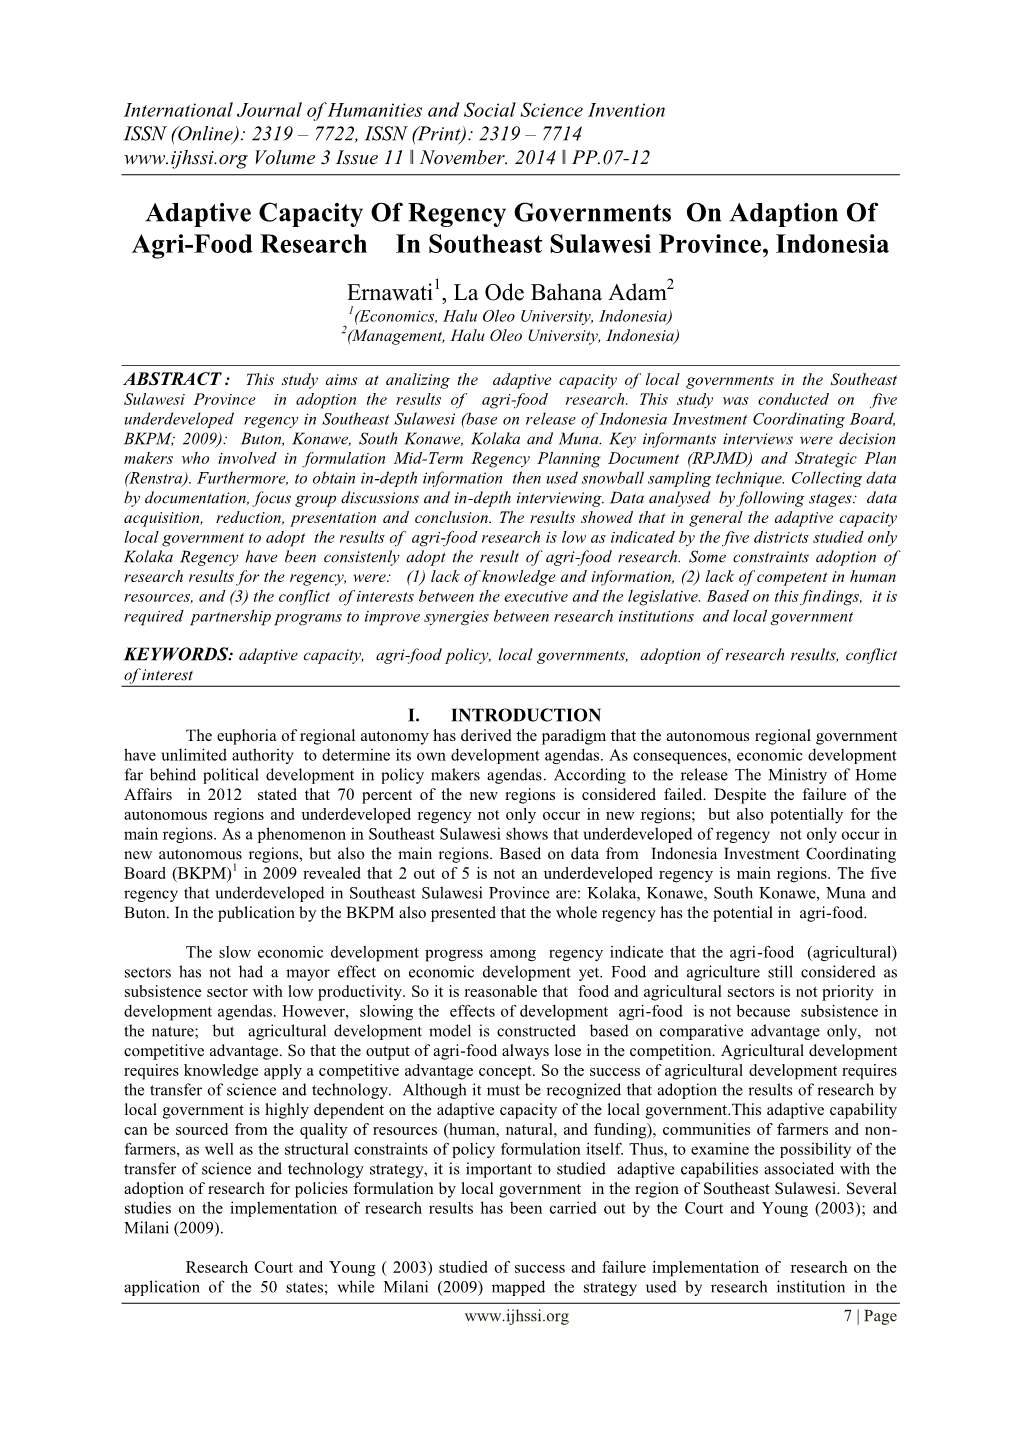 Adaptive Capacity of Regency Governments on Adaption of Agri-Food Research in Southeast Sulawesi Province, Indonesia